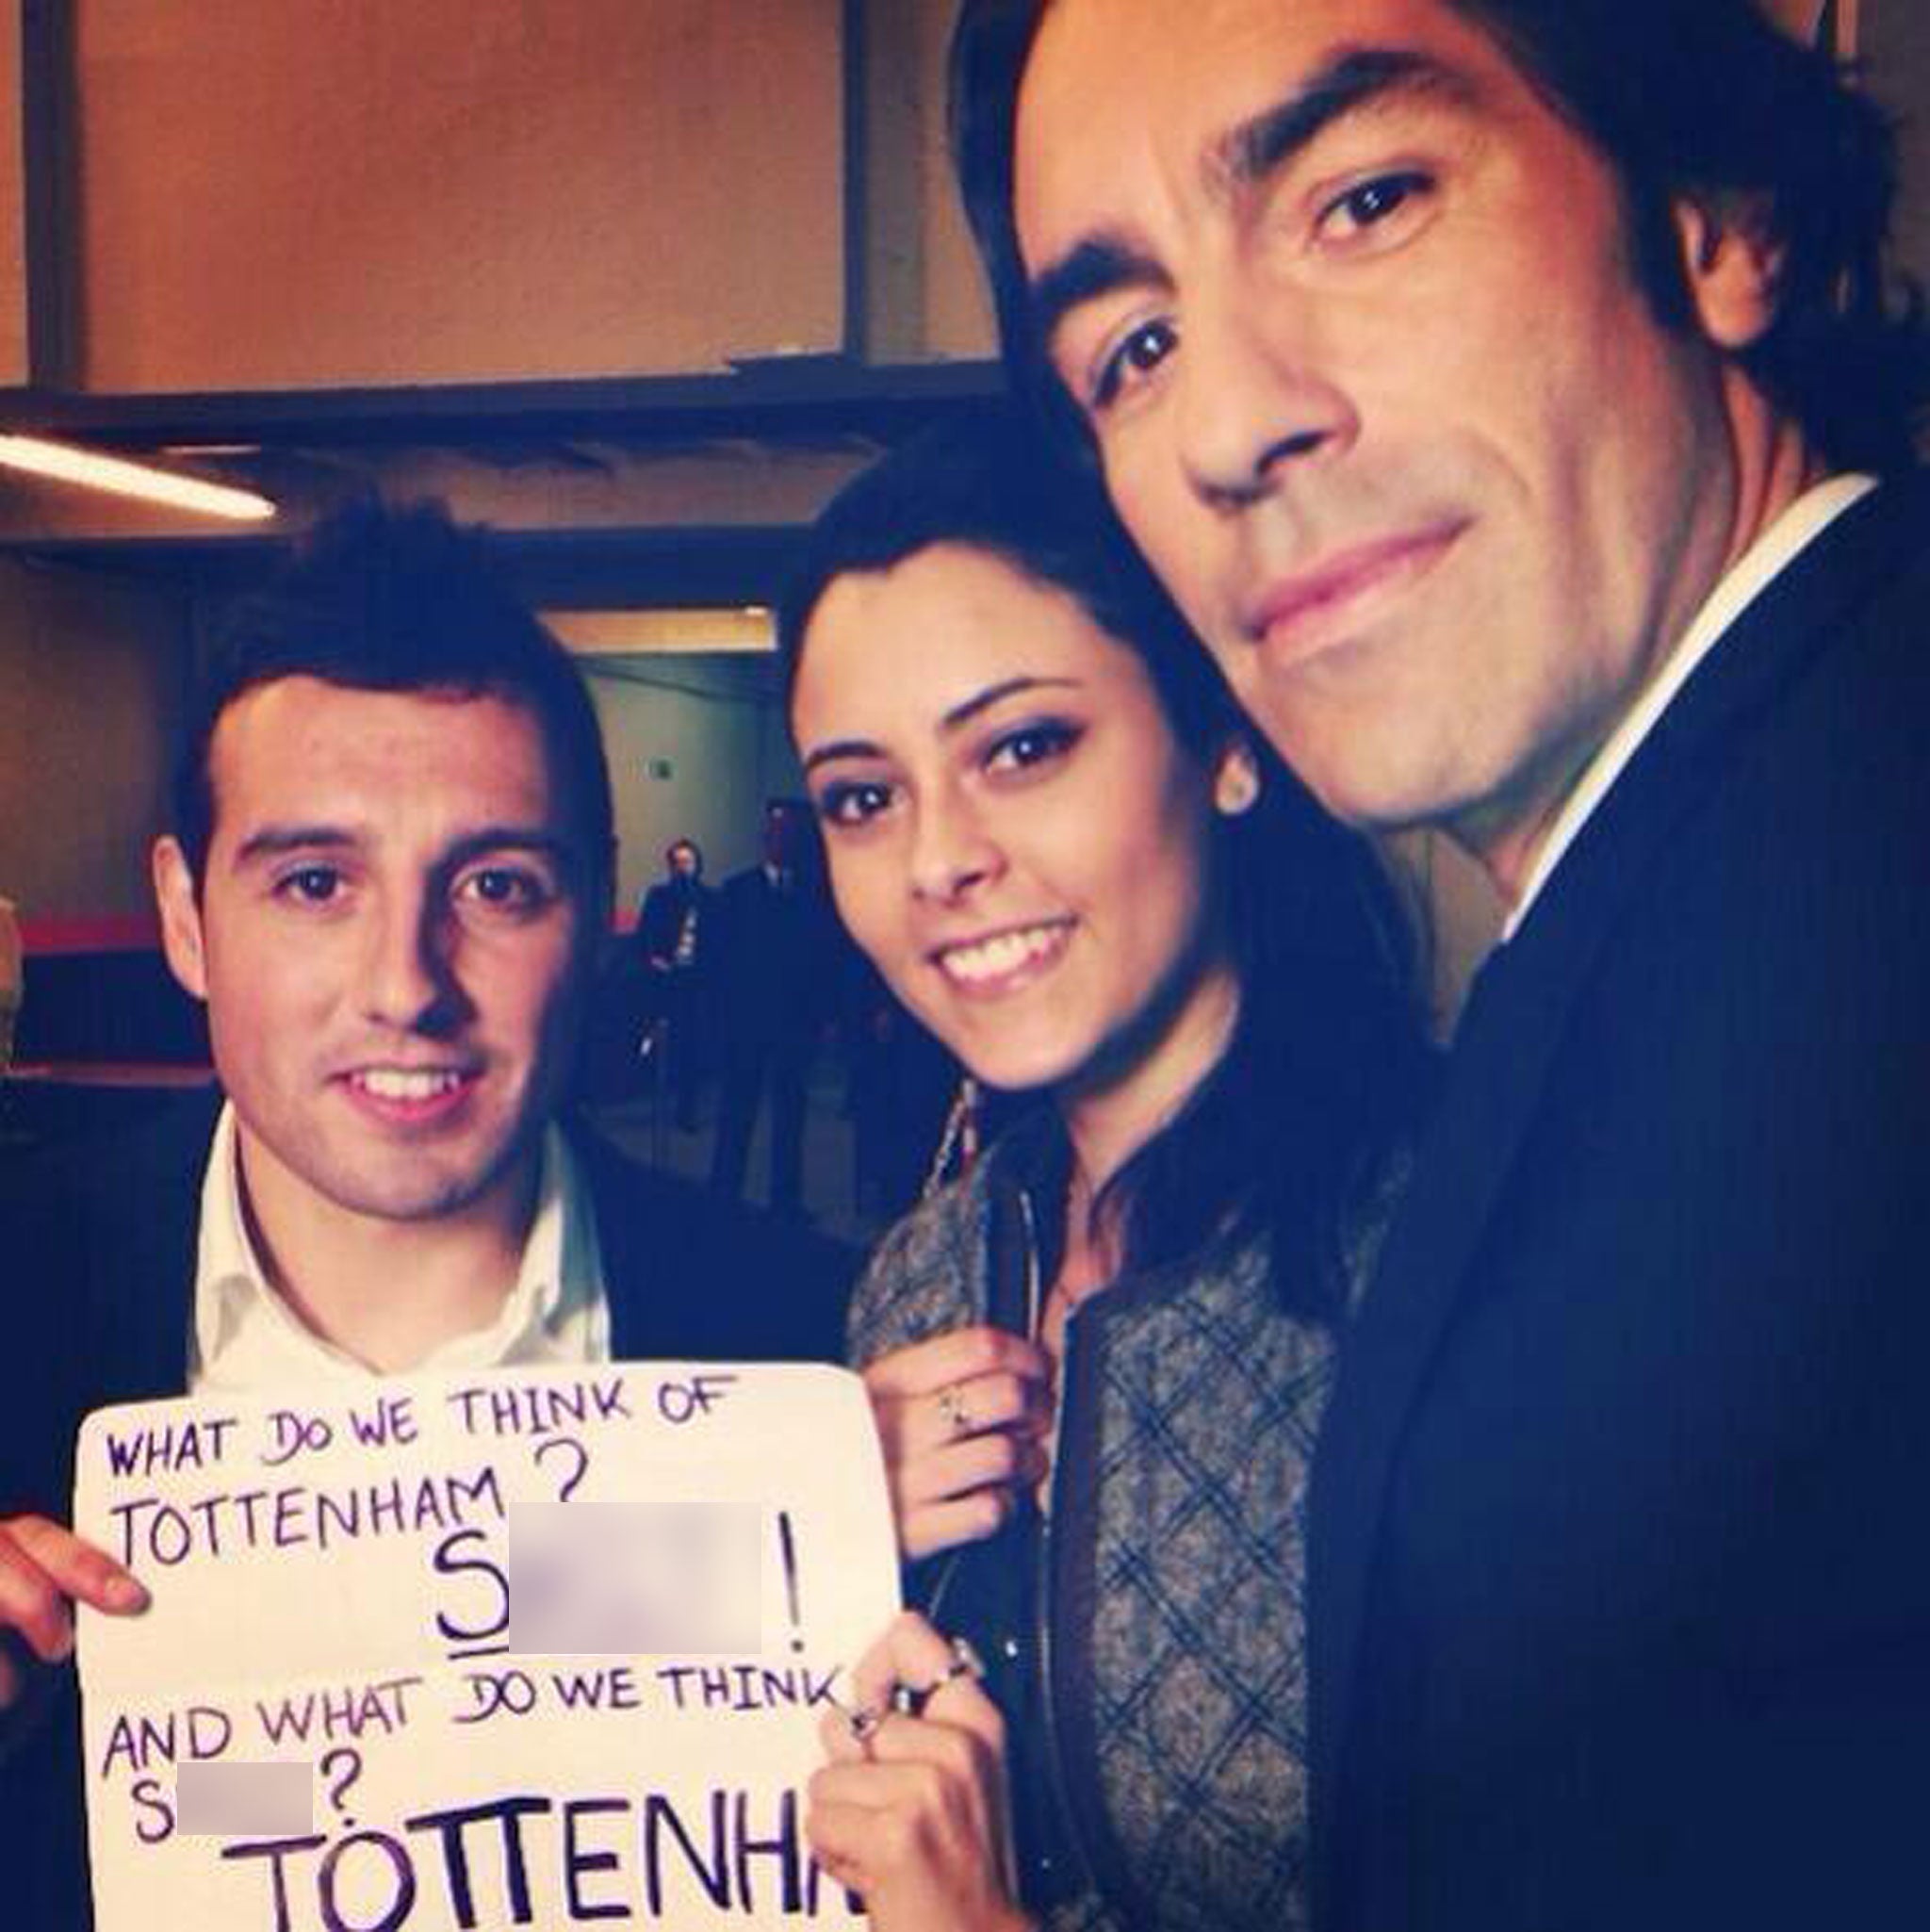 Current Arsenal midfielder Santi Cazorla and former player Robert Pires pose with a female fan holding an expletive-ridden chant aimed towards Tottenham supporters